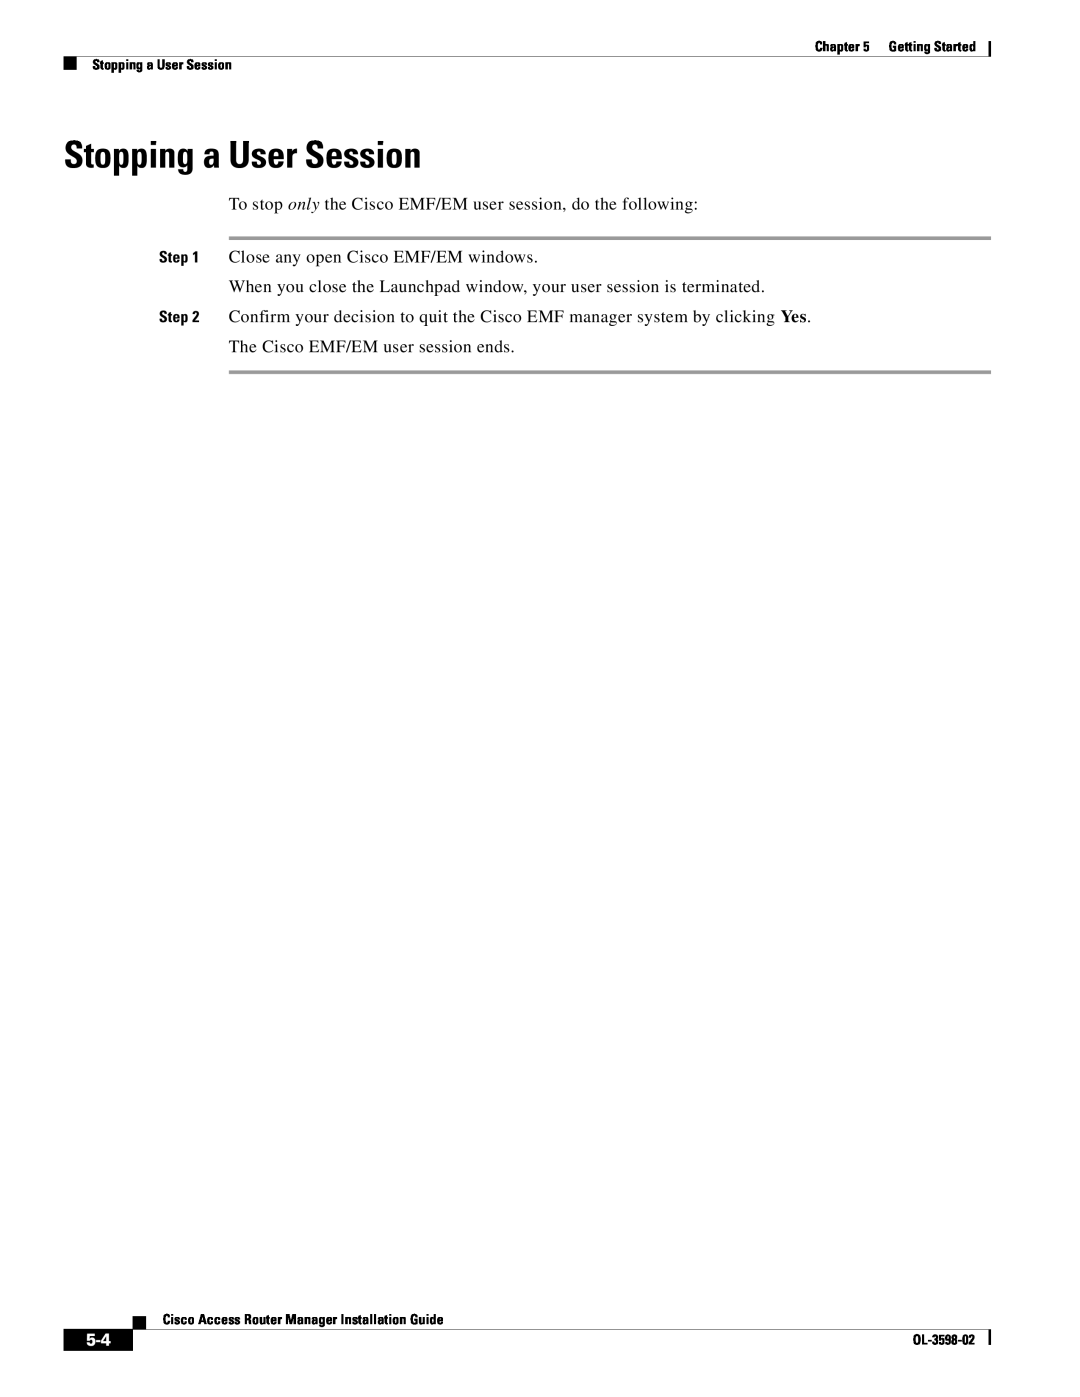 Cisco Systems OL-3598-02 manual Stopping a User Session 